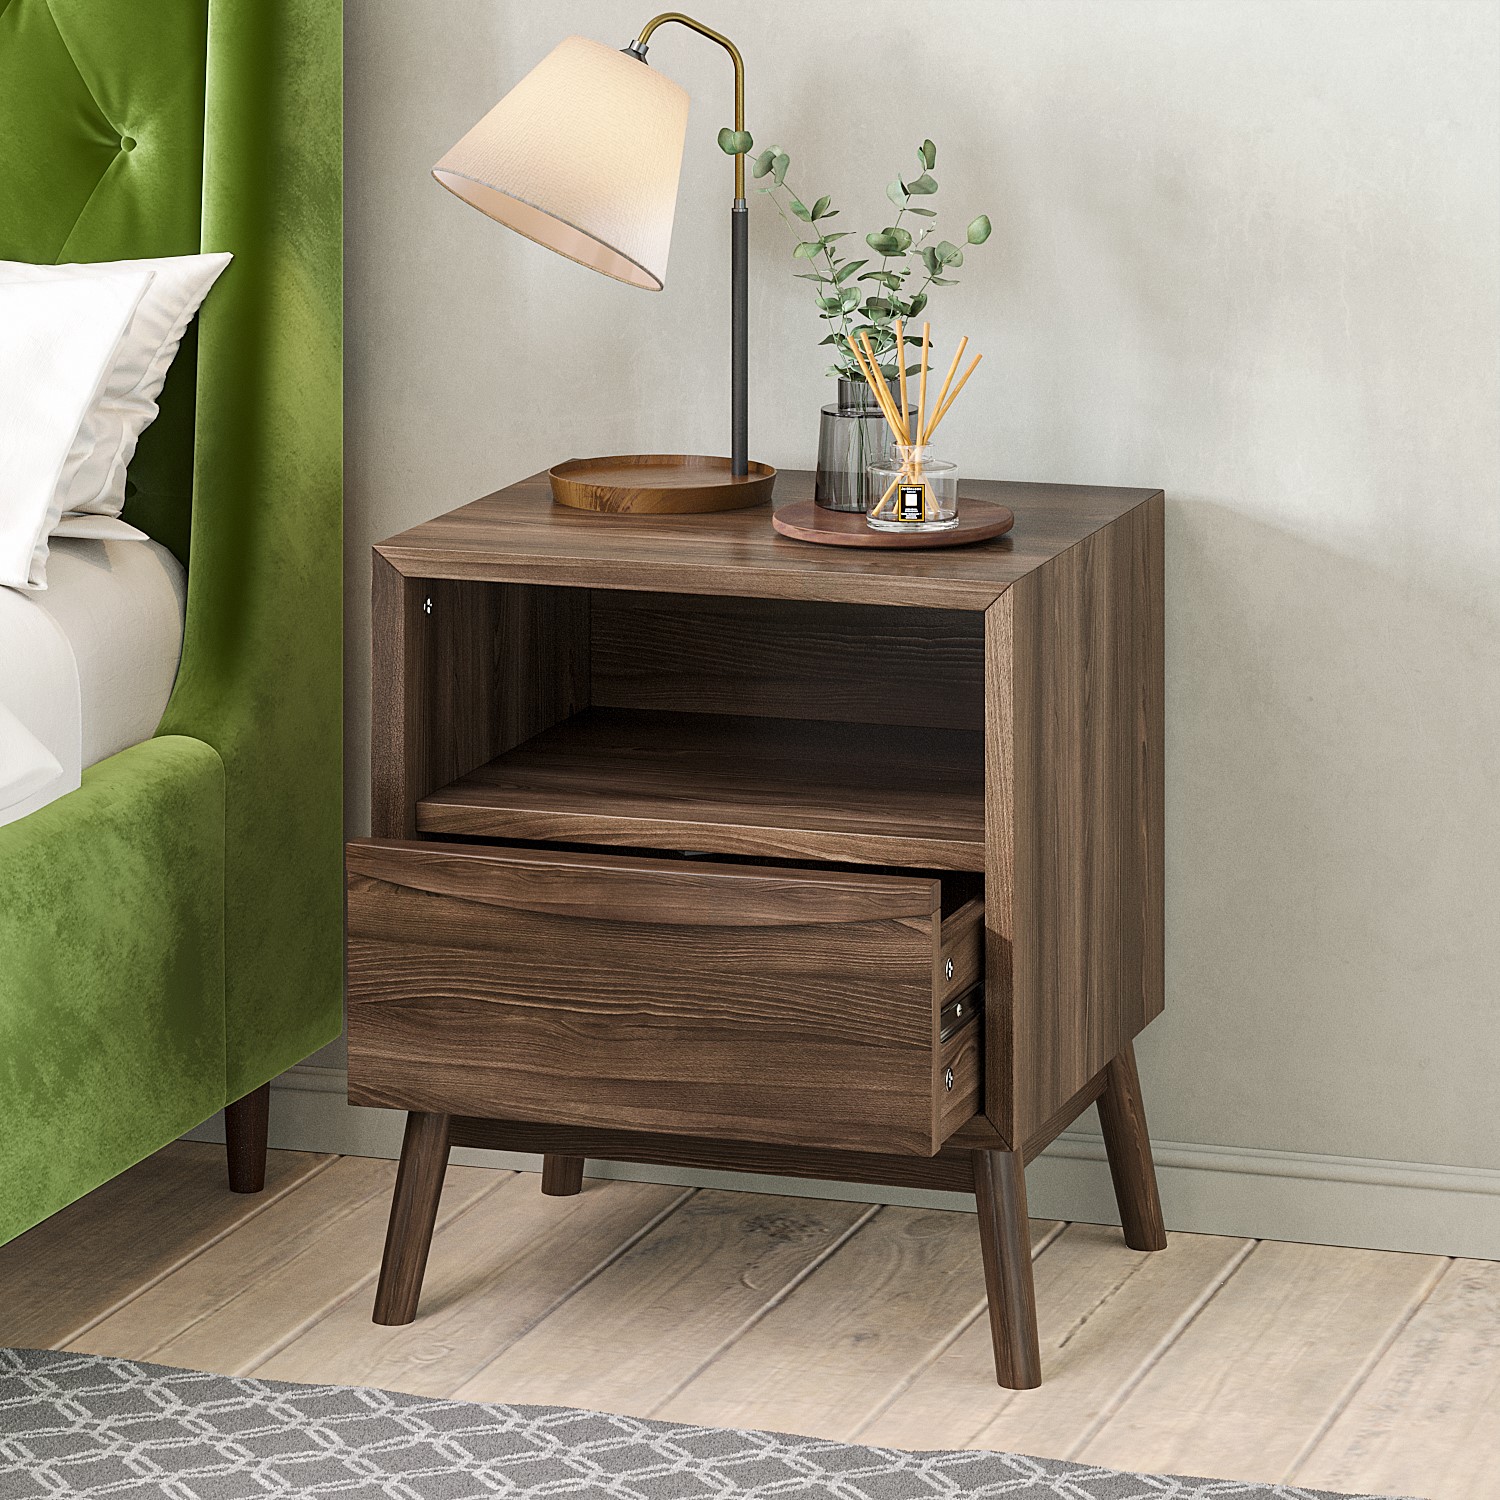 Read more about Walnut mid-century bedside table with drawer frances